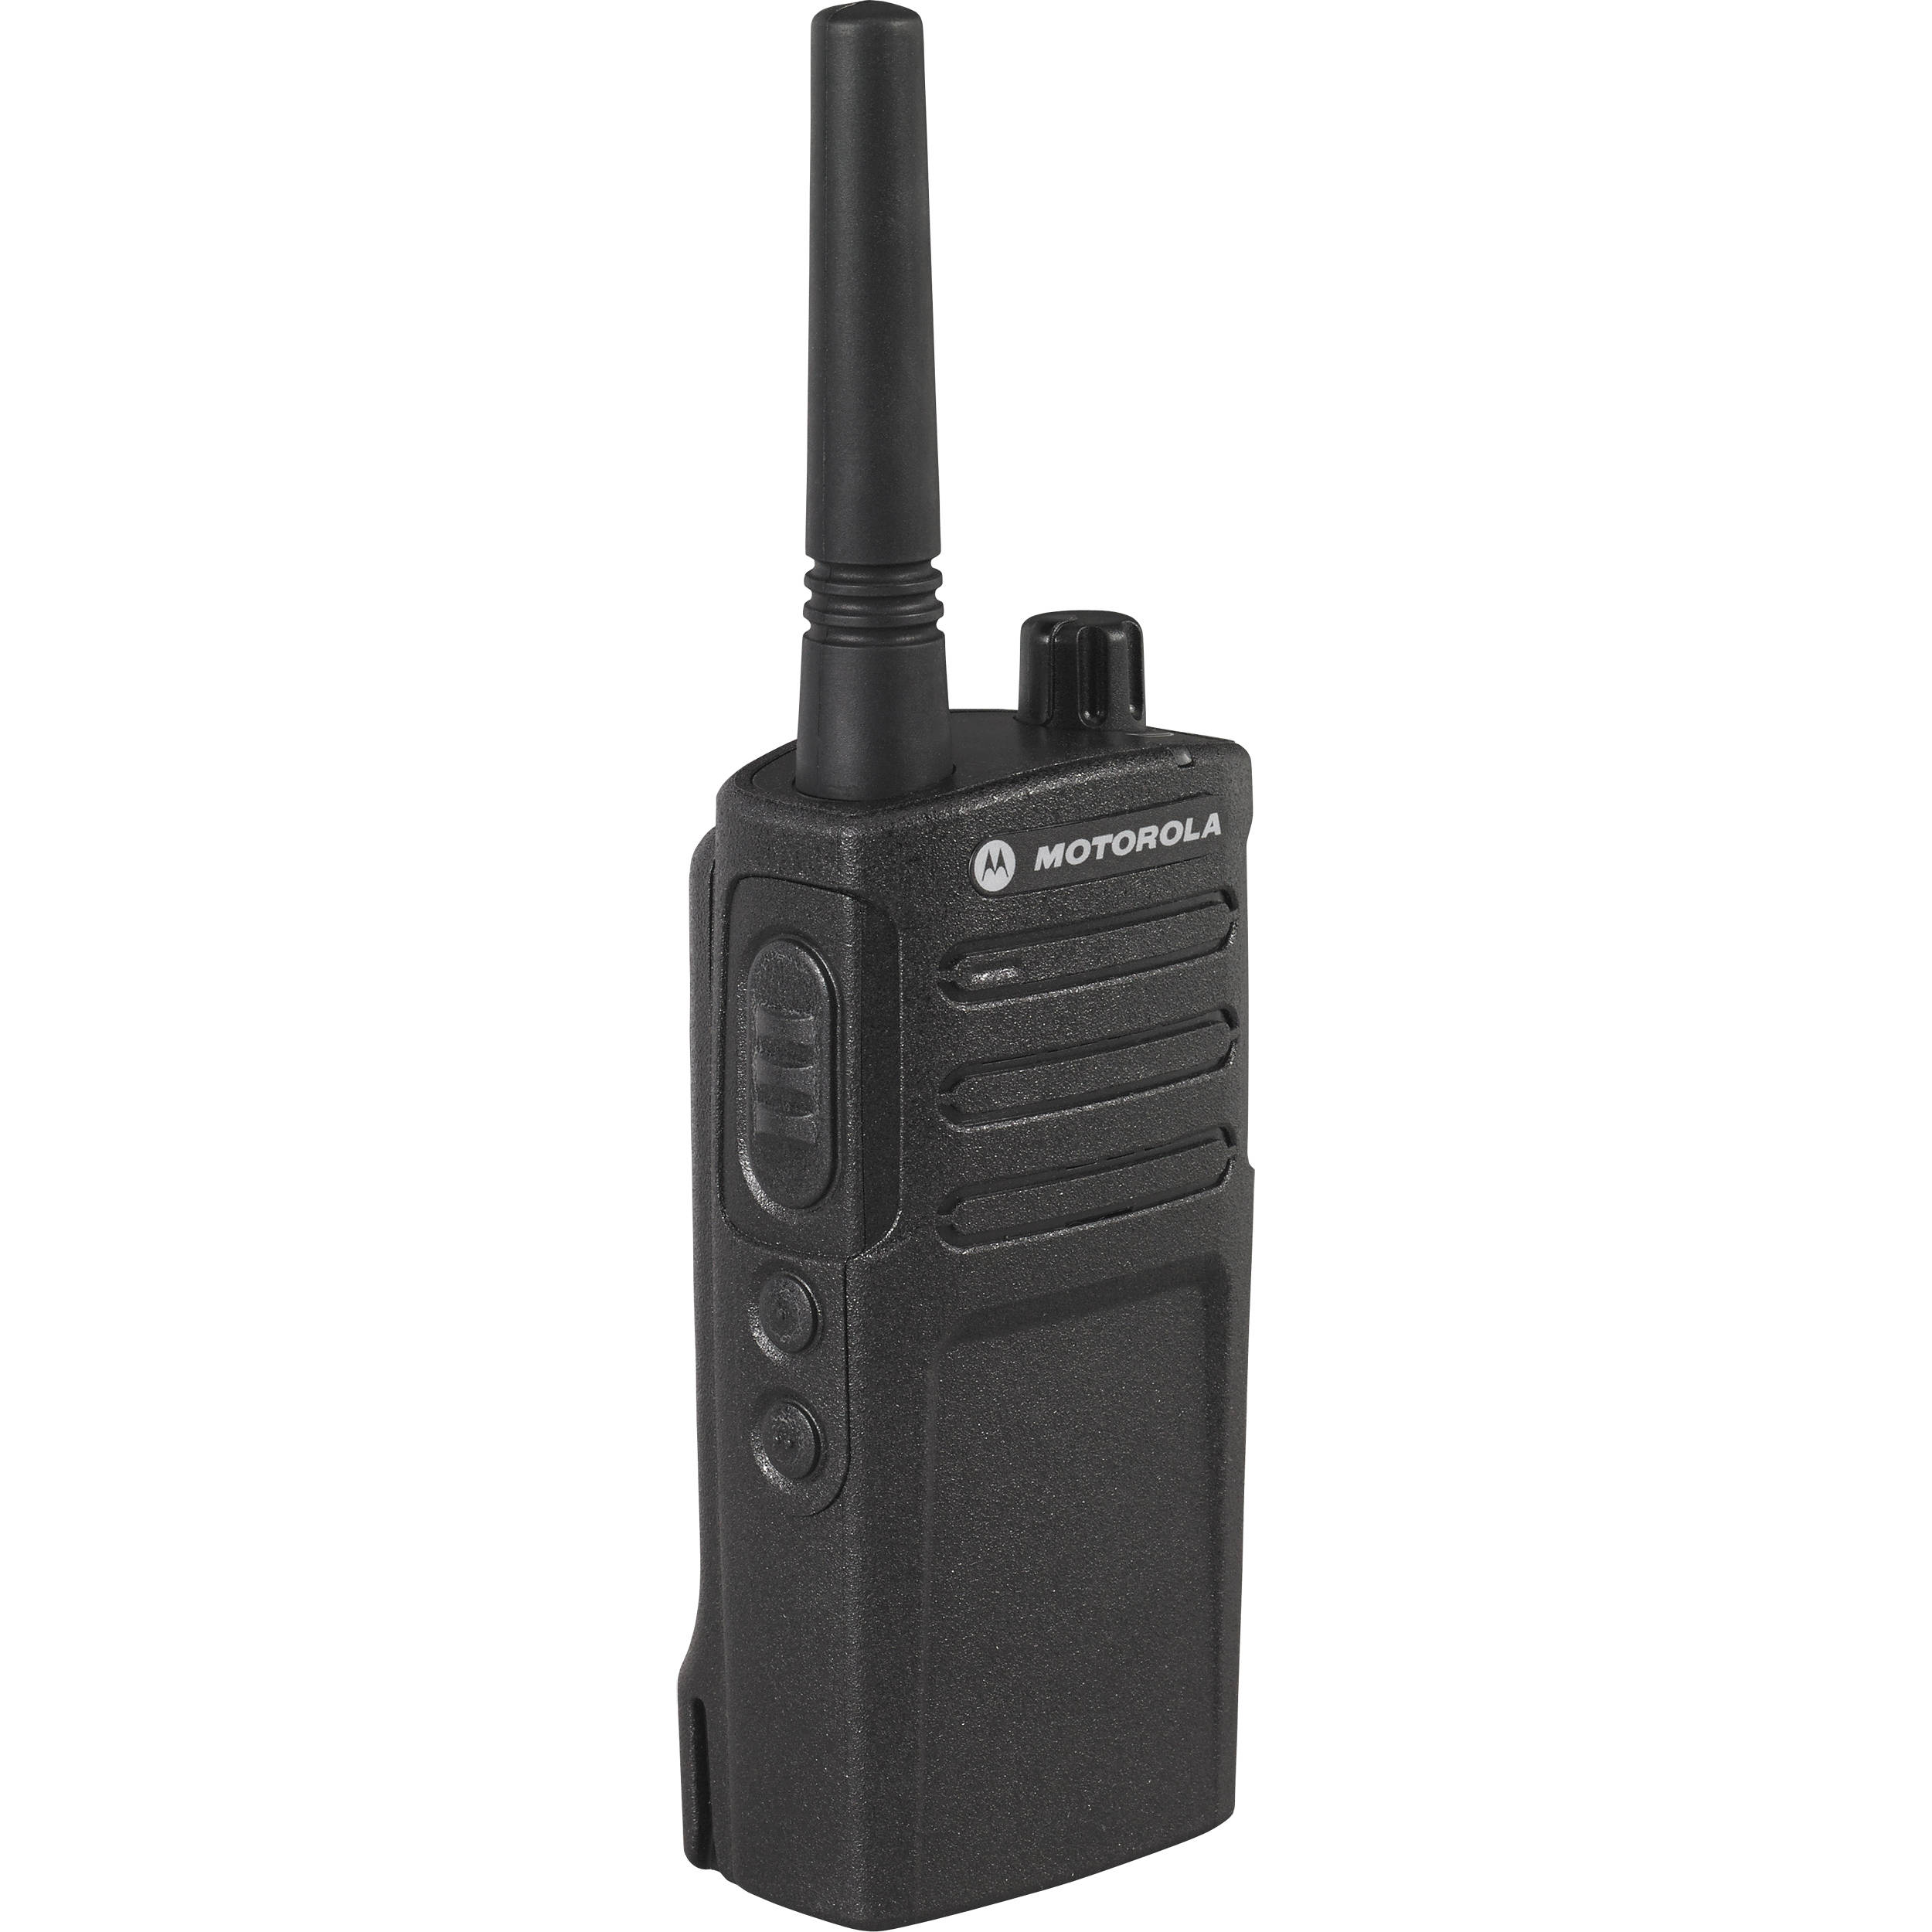 Best 2 Way Radios For Business 2020